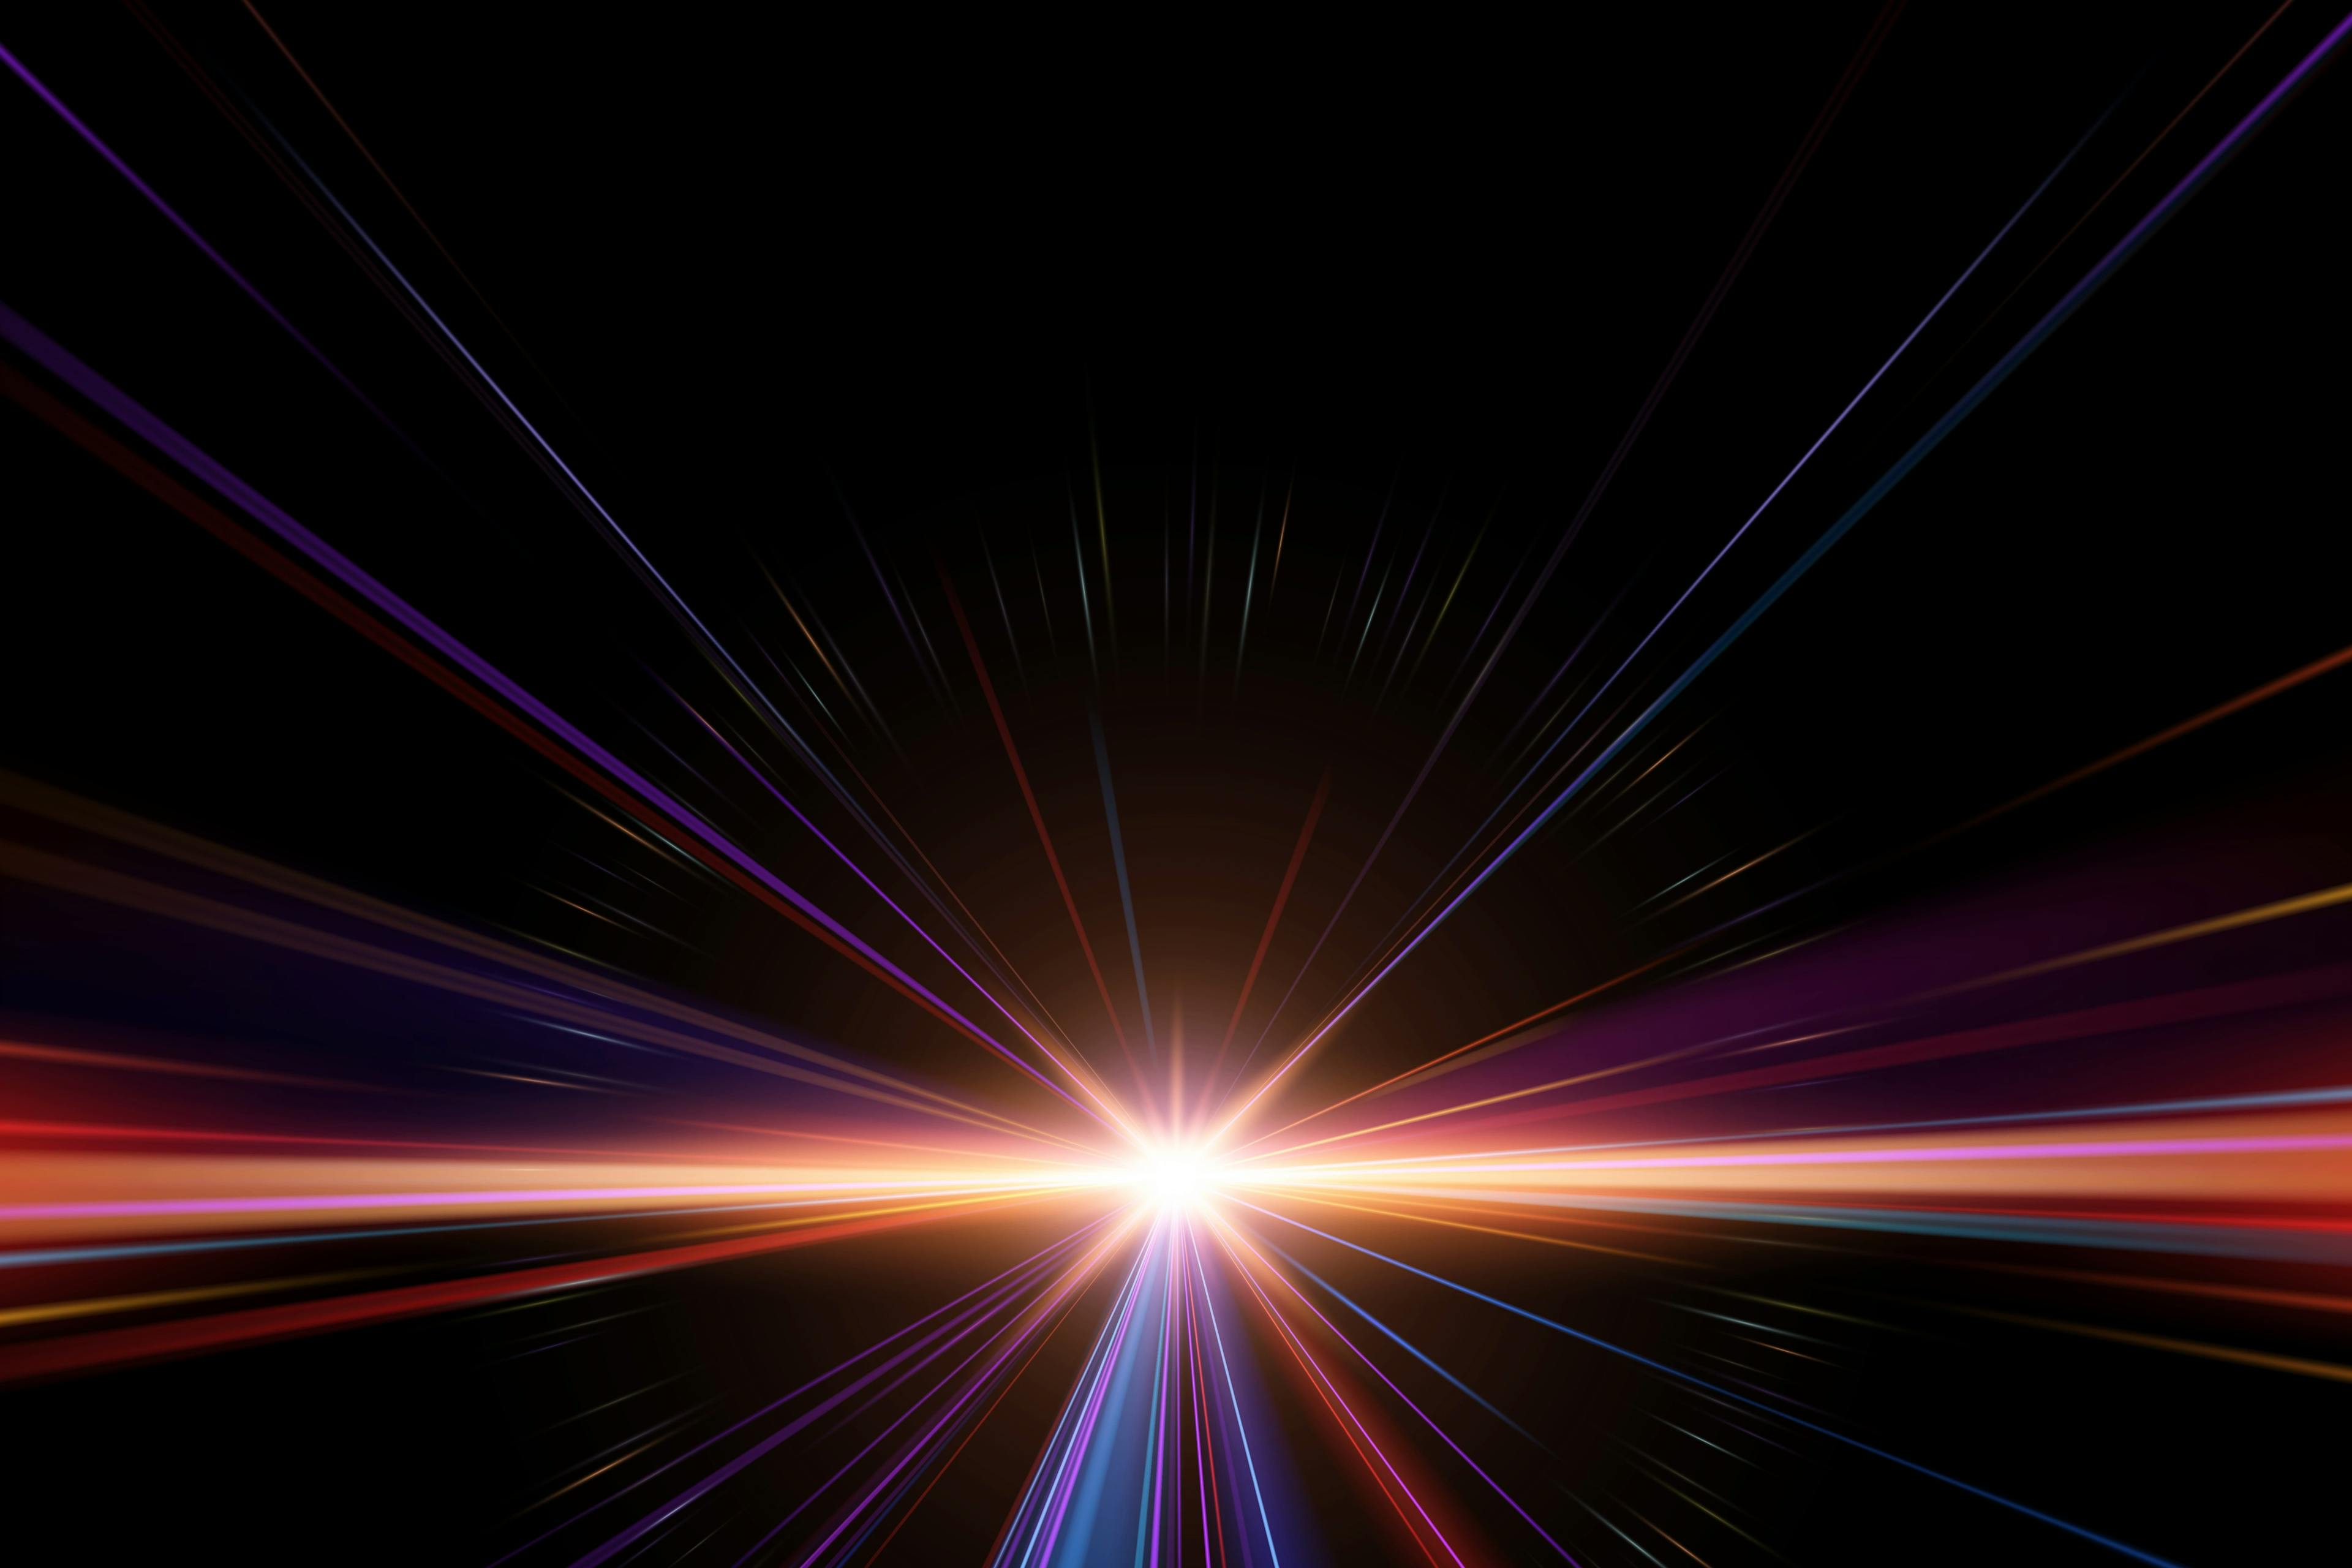 Laser light beams on a dark background with a spotlight in the center